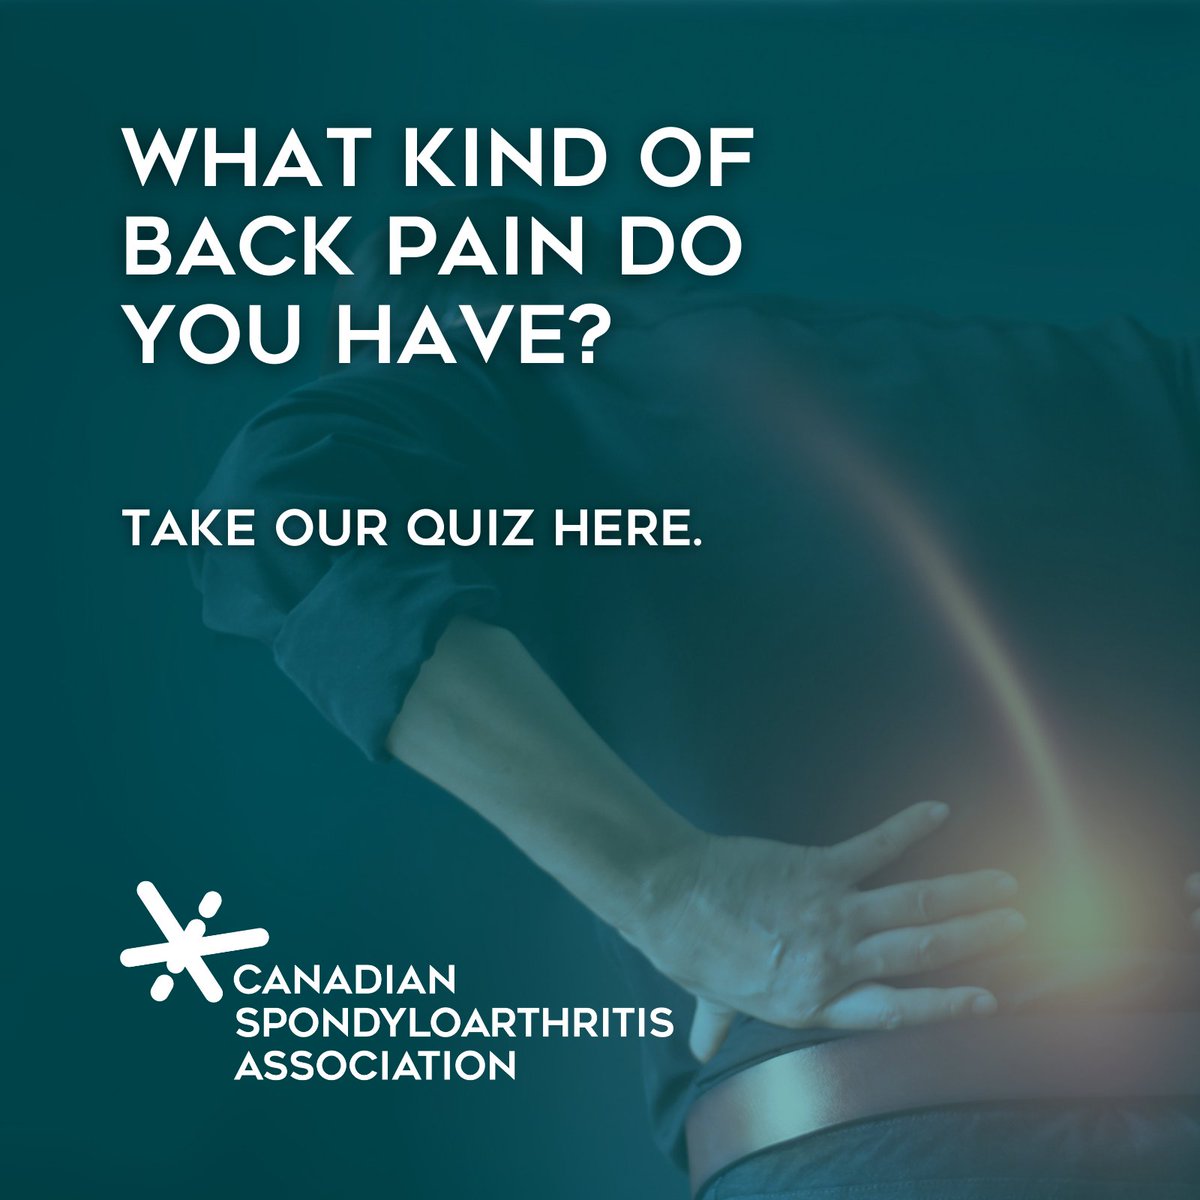 While rest will often improve mechanical back pain, inflammatory back pain improves with physical activity and may get worse with rest. What type of back pain do you have? Take our quiz and discuss the results with your physician! loom.ly/wSnXicU